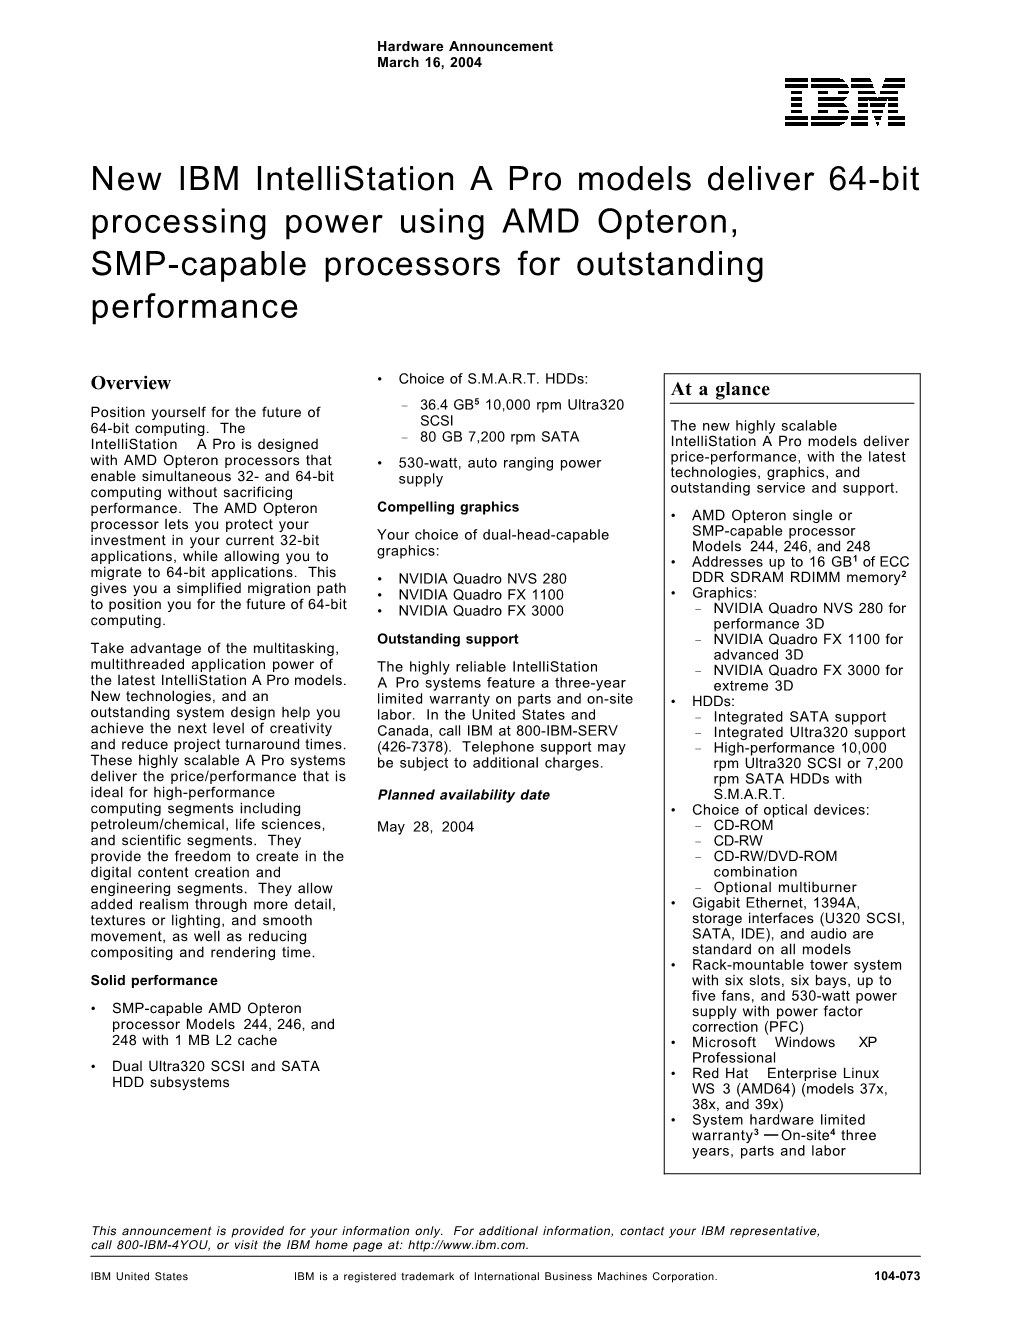 New IBM Intellistation a Pro Models Deliver 64-Bit Processing Power Using AMD Opteron, SMP-Capable Processors for Outstanding Performance